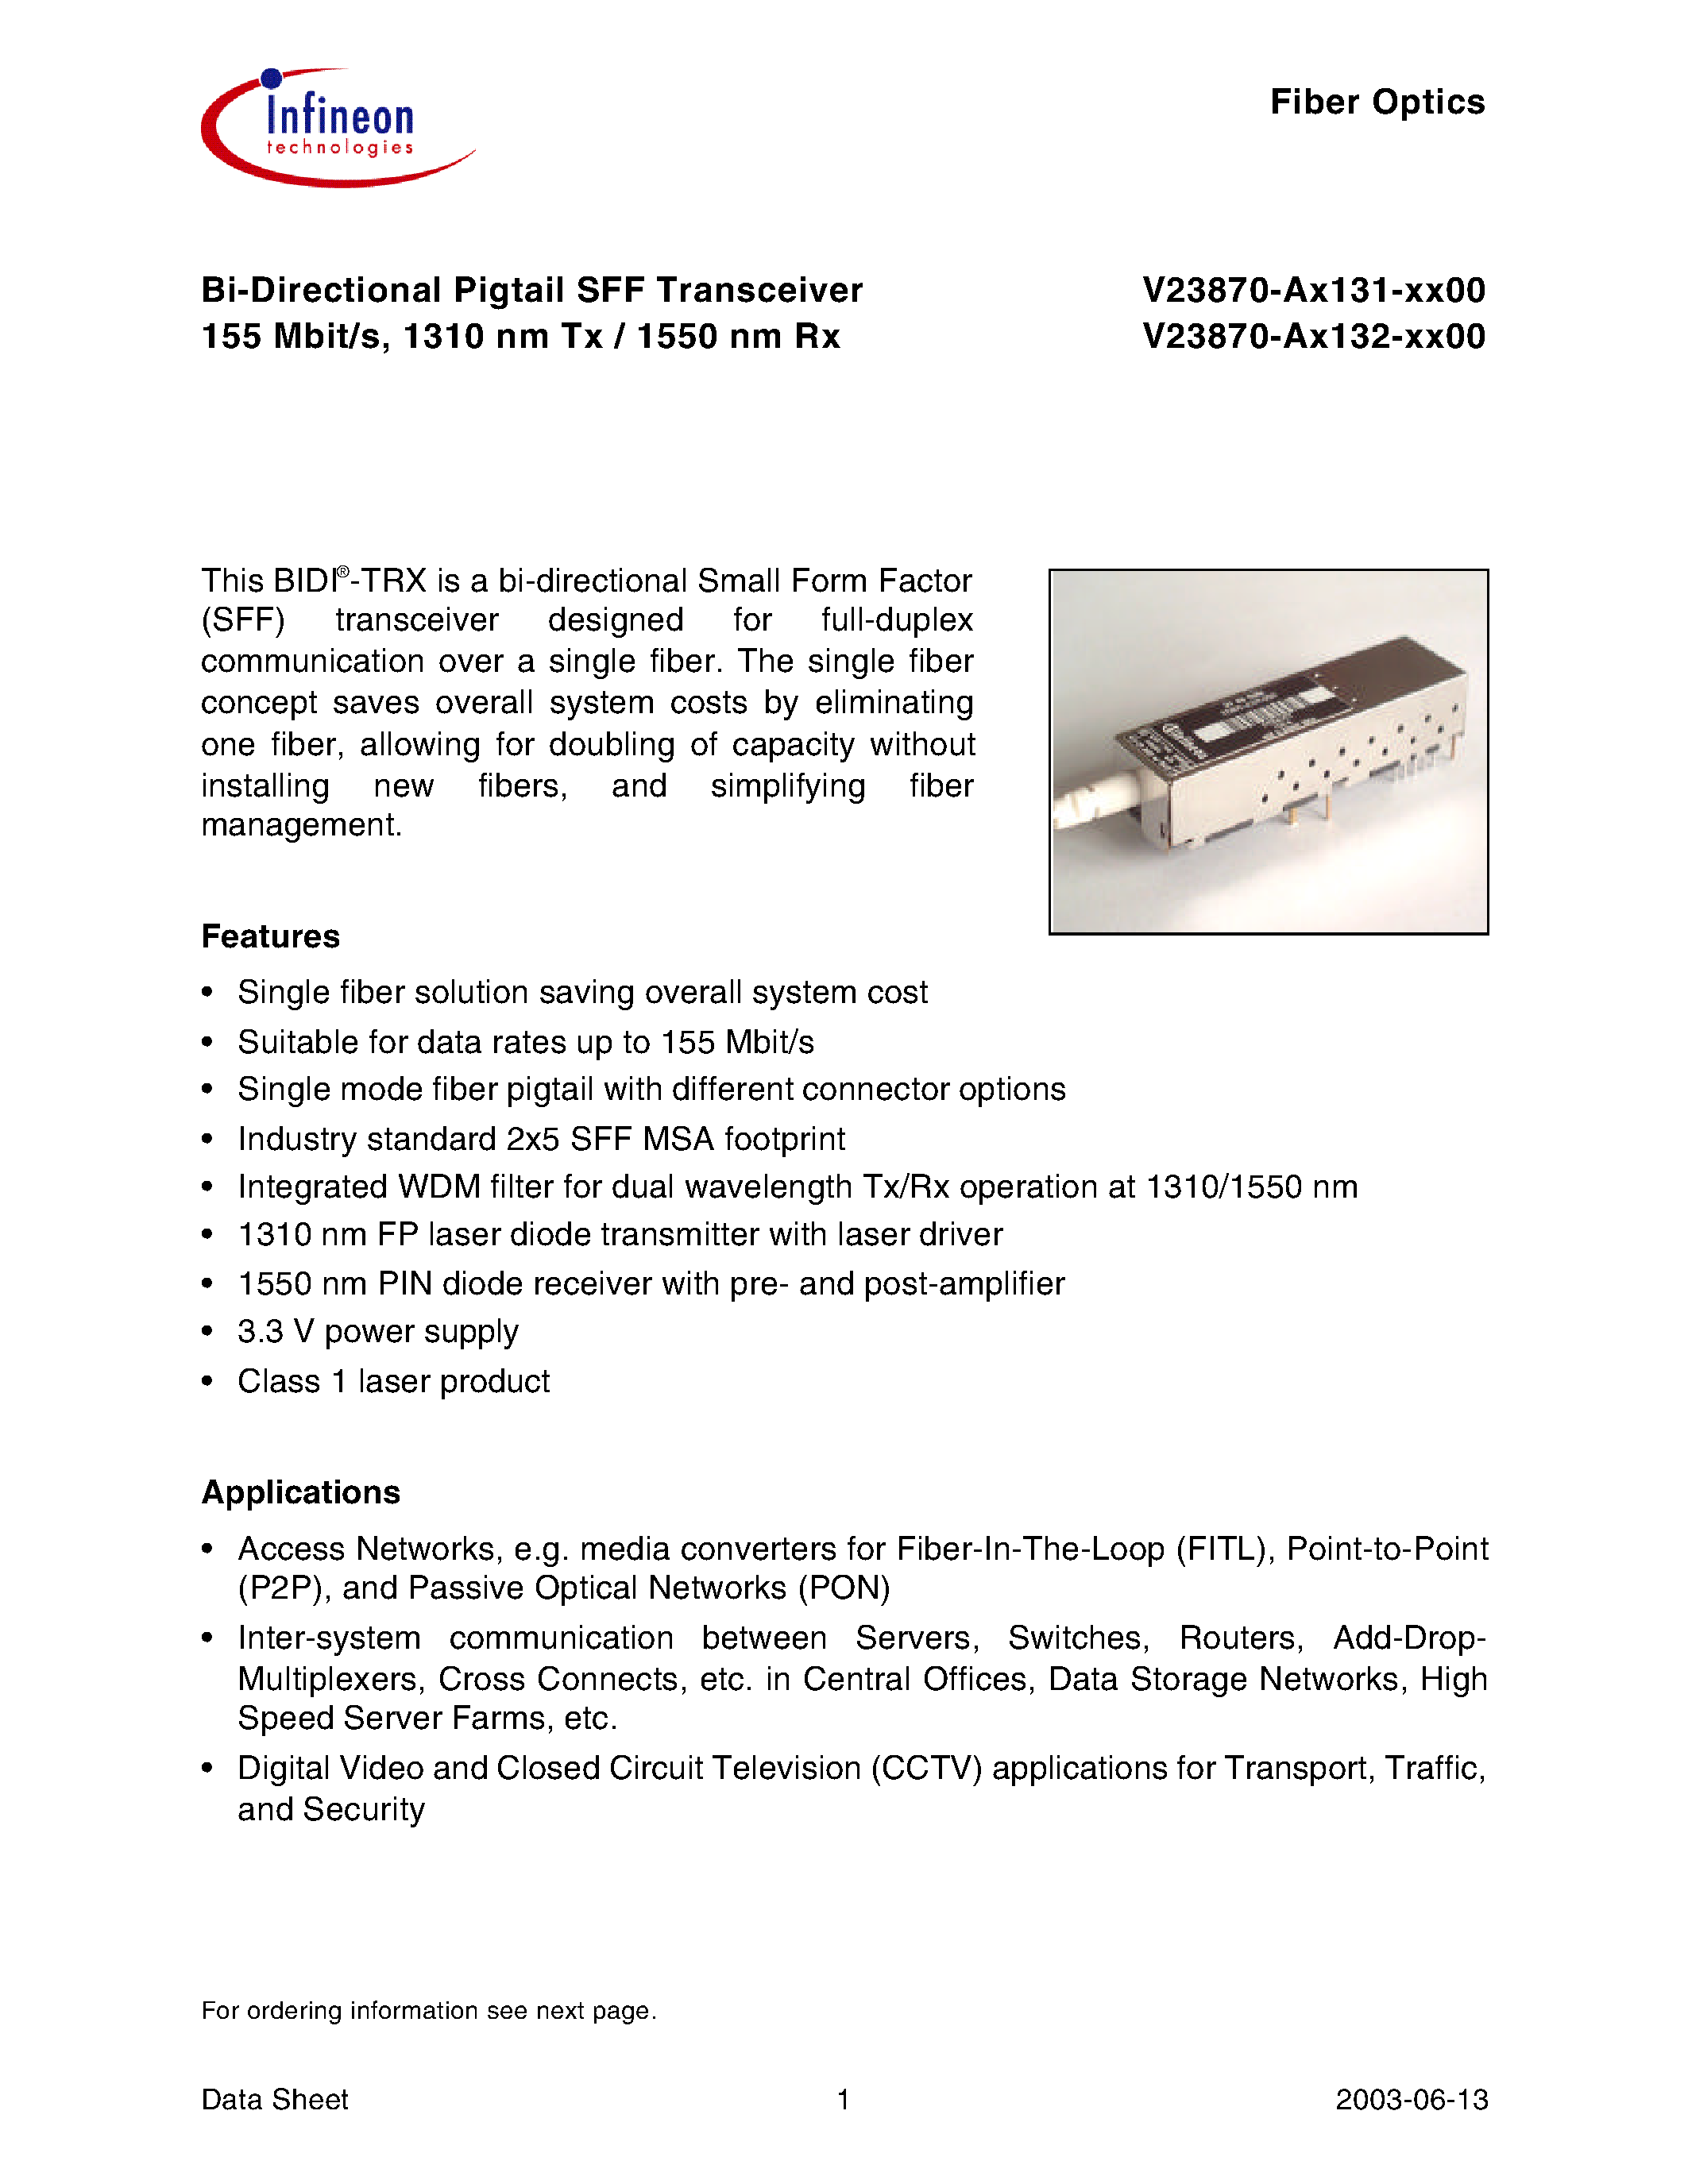 Datasheet V23870-A1131-C100 - Bi-Directional Pigtail SFF Transceiver 155 Mbit/s/ 1310 nm Tx / 1550 nm Rx page 1